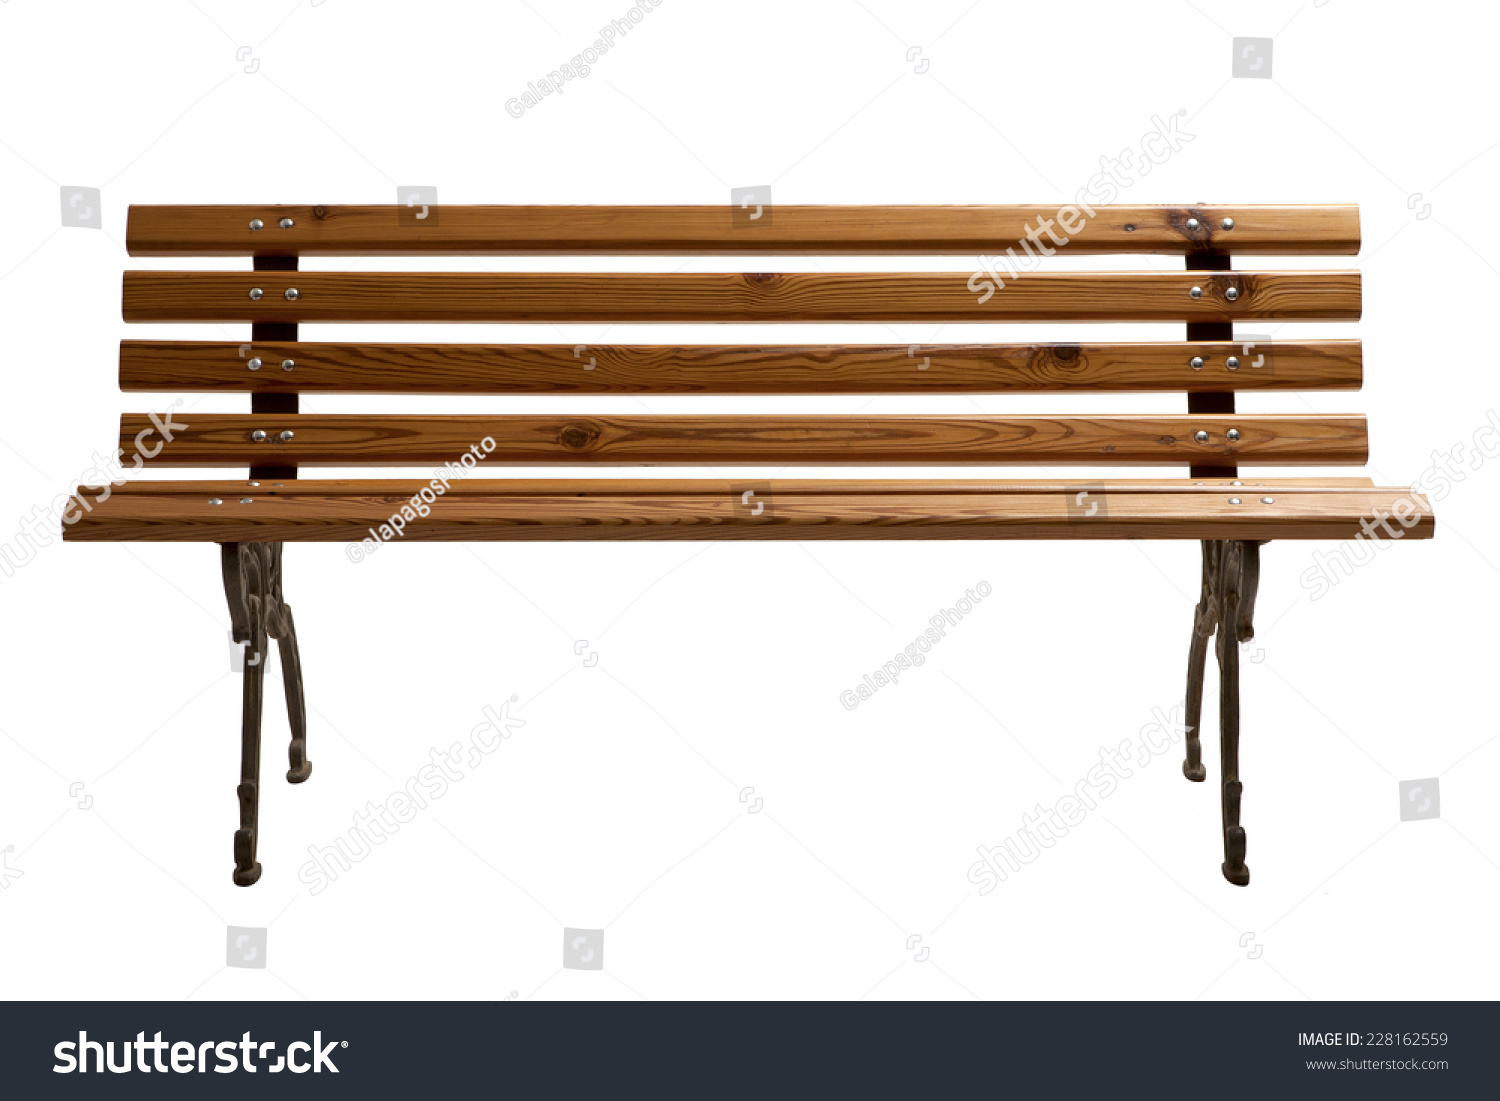 Wooden Park Bench Isolated on White Background #228162559